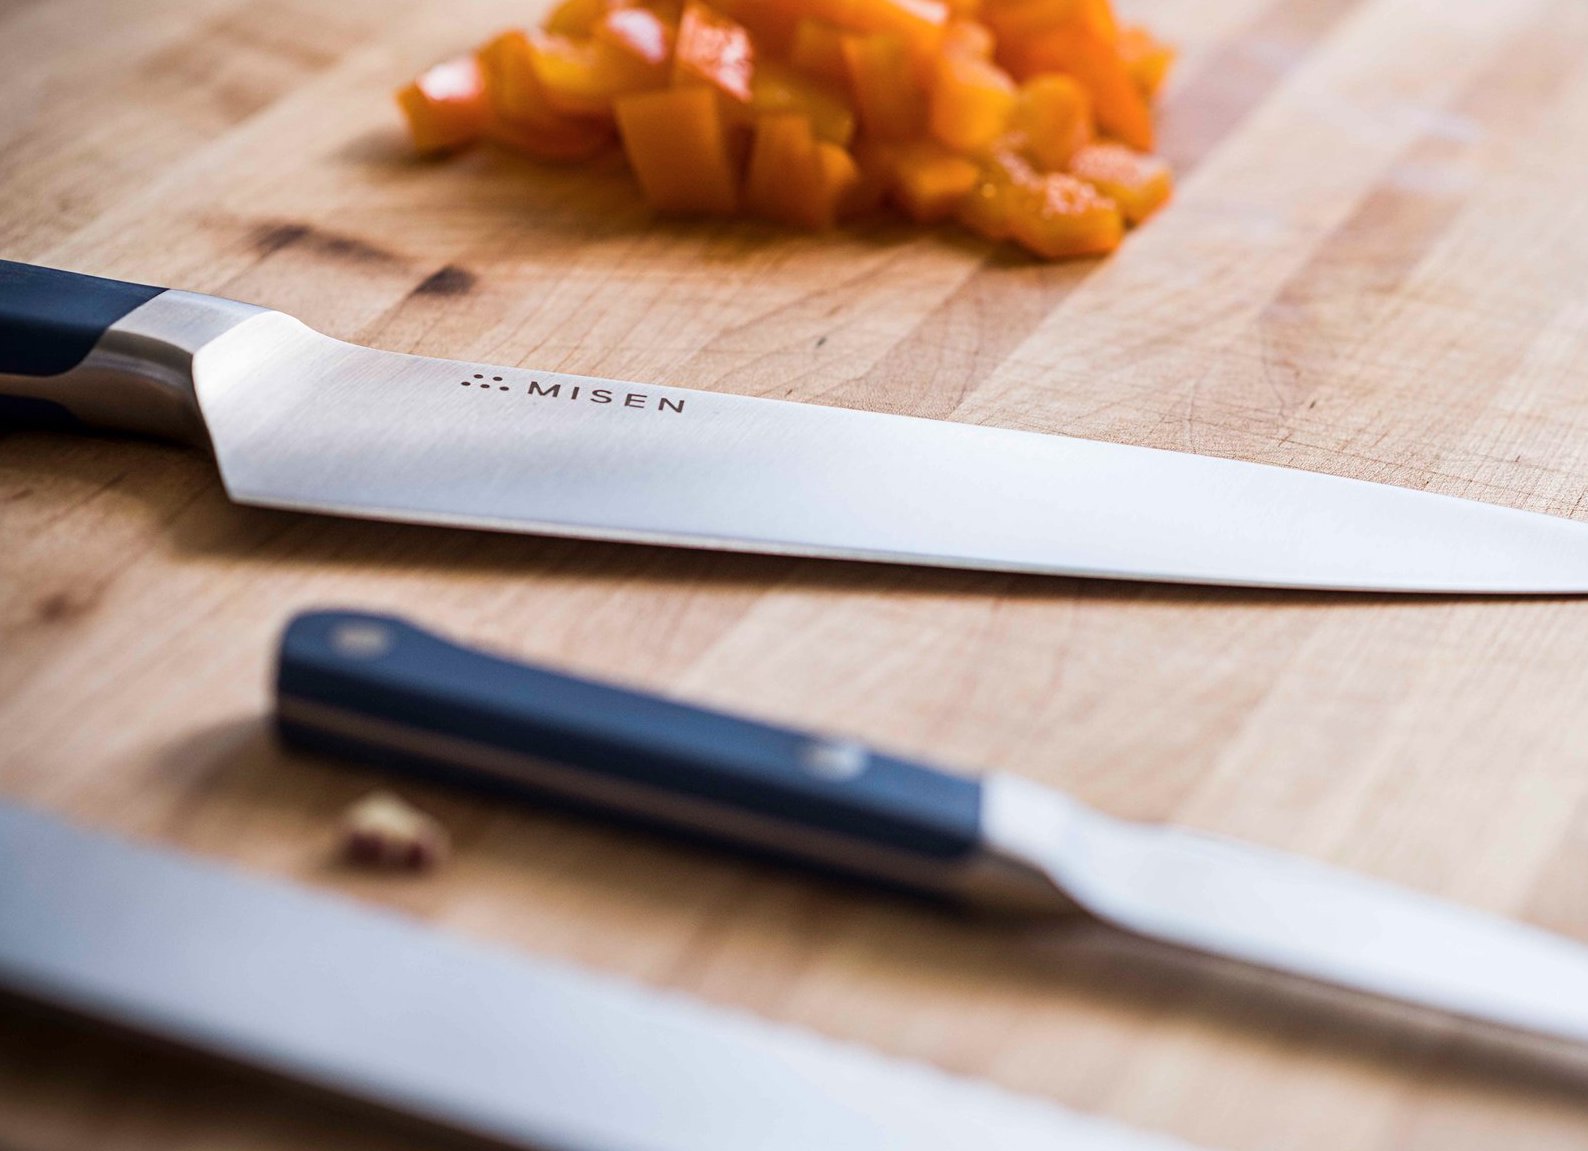 How to sharpen a knife: three Misen kitchen knives on a cutting board